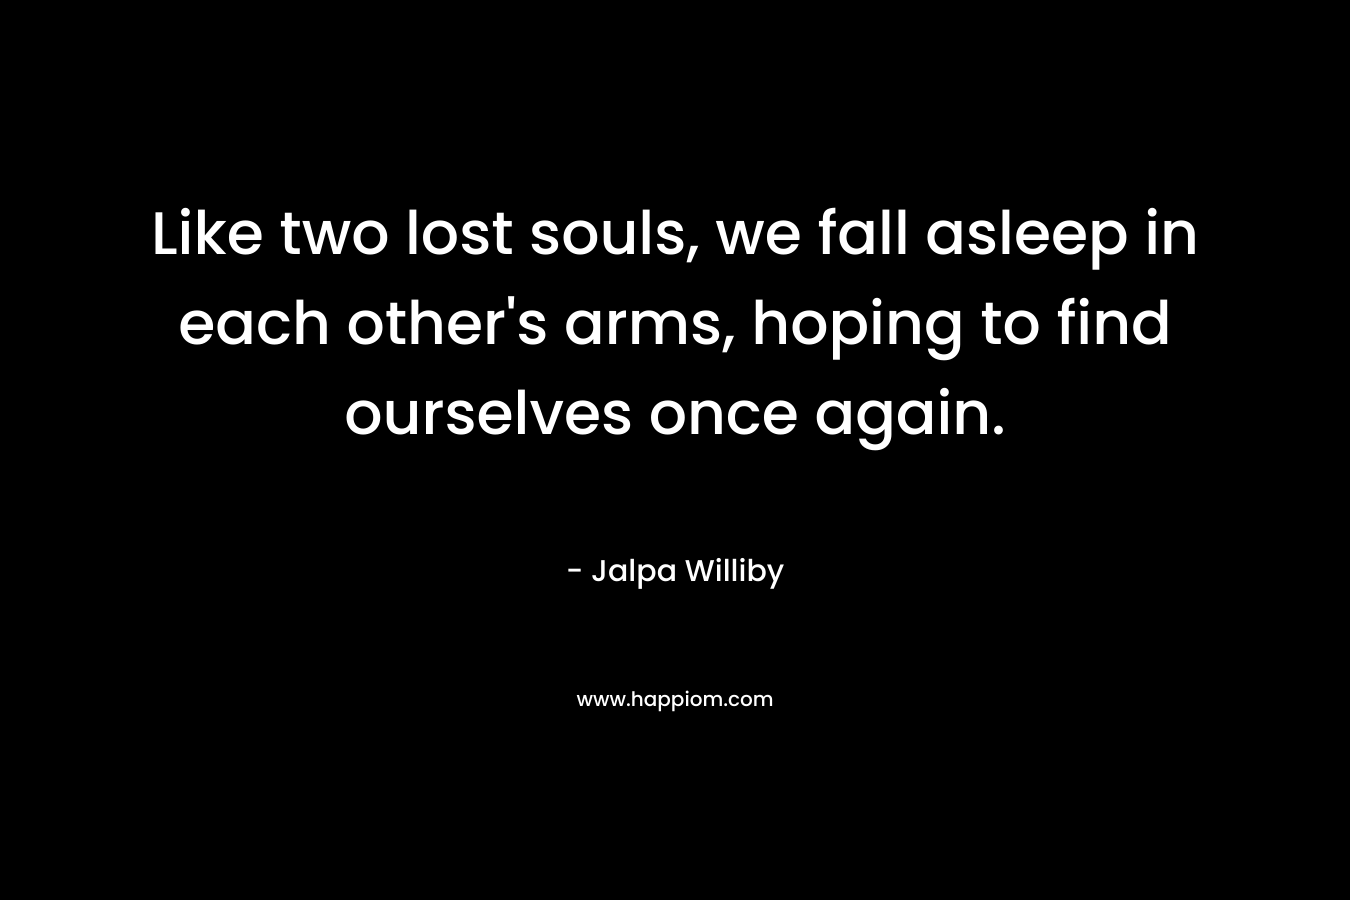 Like two lost souls, we fall asleep in each other's arms, hoping to find ourselves once again.